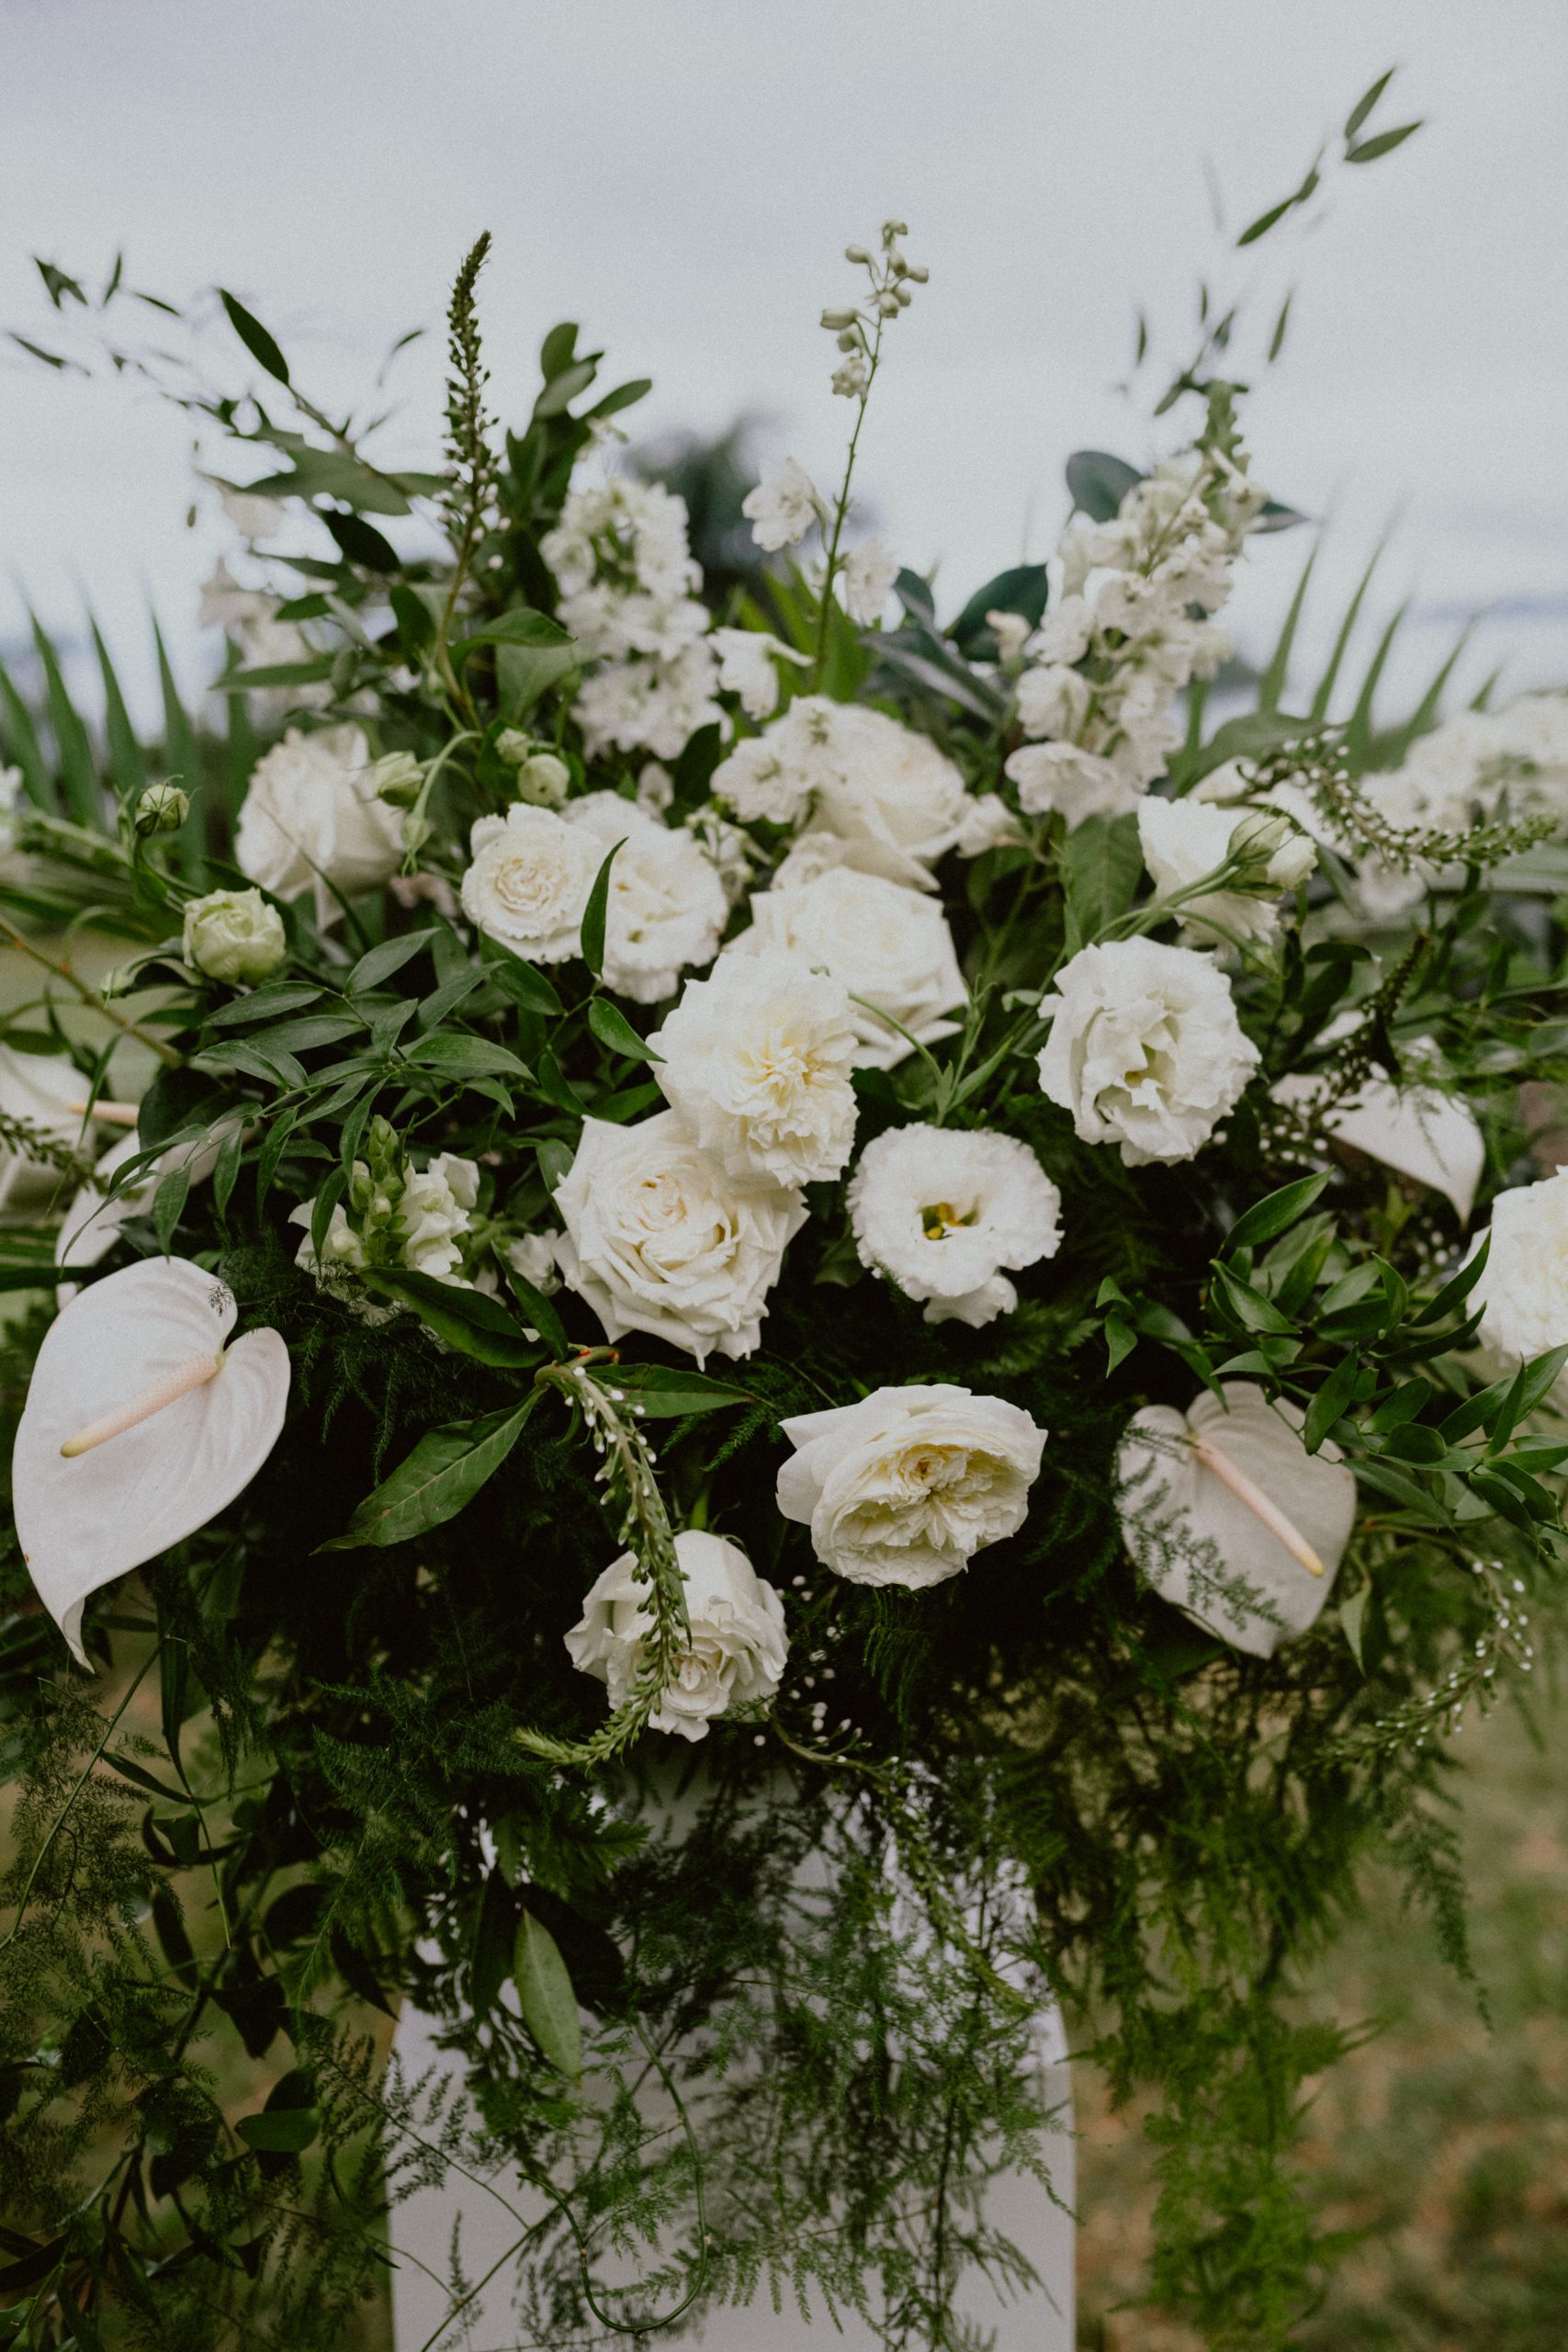 White rose wedding florals with lilies for the ceremony at Kualoa Ranch | Oahu Wedding Photographer, Oahu Elopement Photographer, Destination Wedding Photographer, Destination Elopement Photographer, Newlywed moments ideas, Newlywed Photography inspiration, Hawaii Elopement ideas | chelseaabril.com